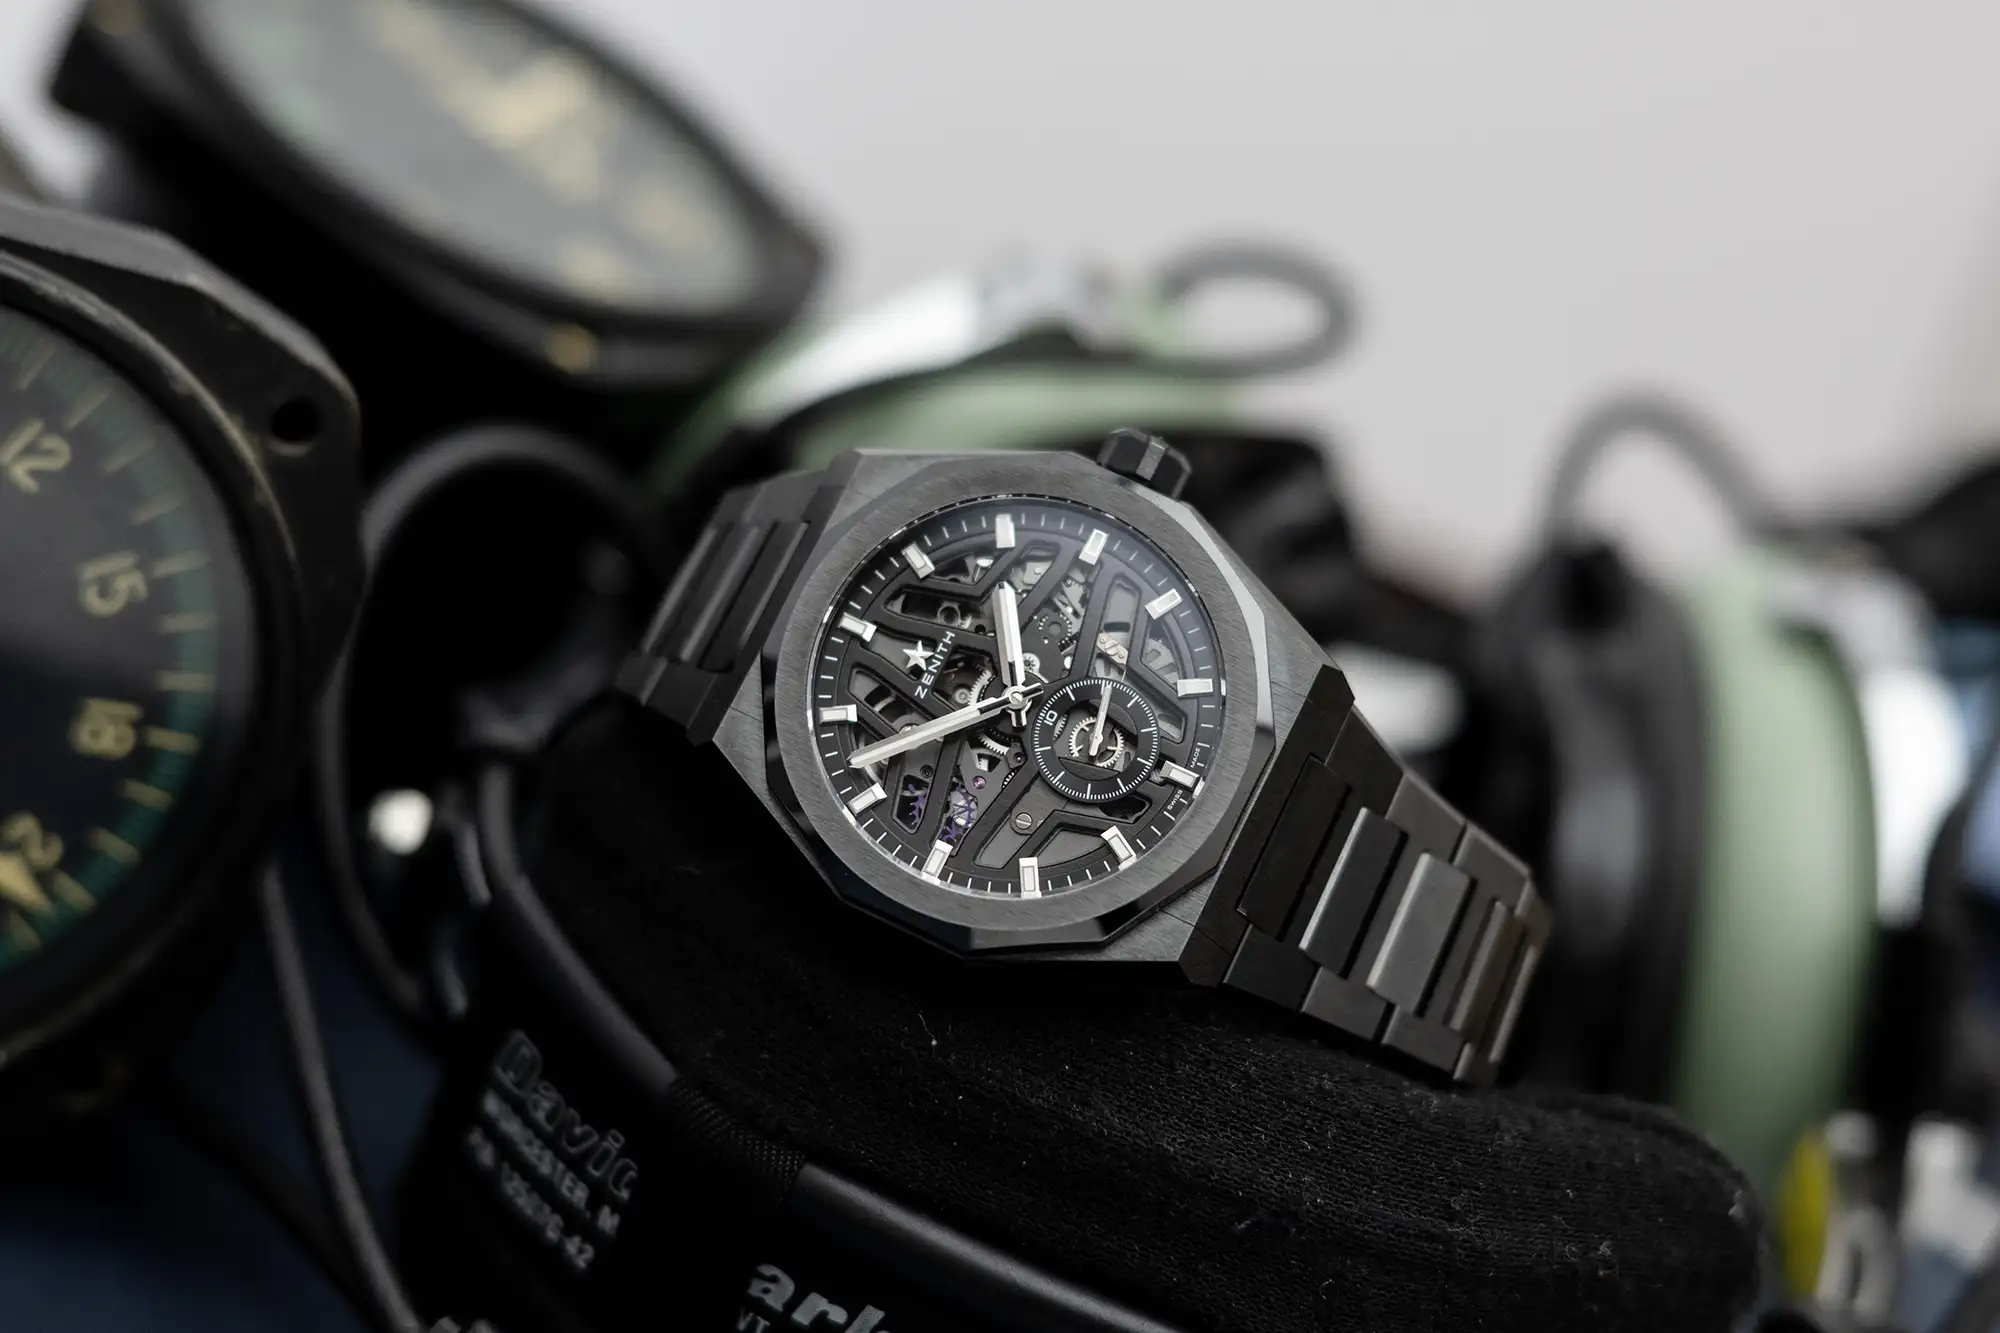 HANDS-ON: The new Zenith Defy Revival A3691 & A3690